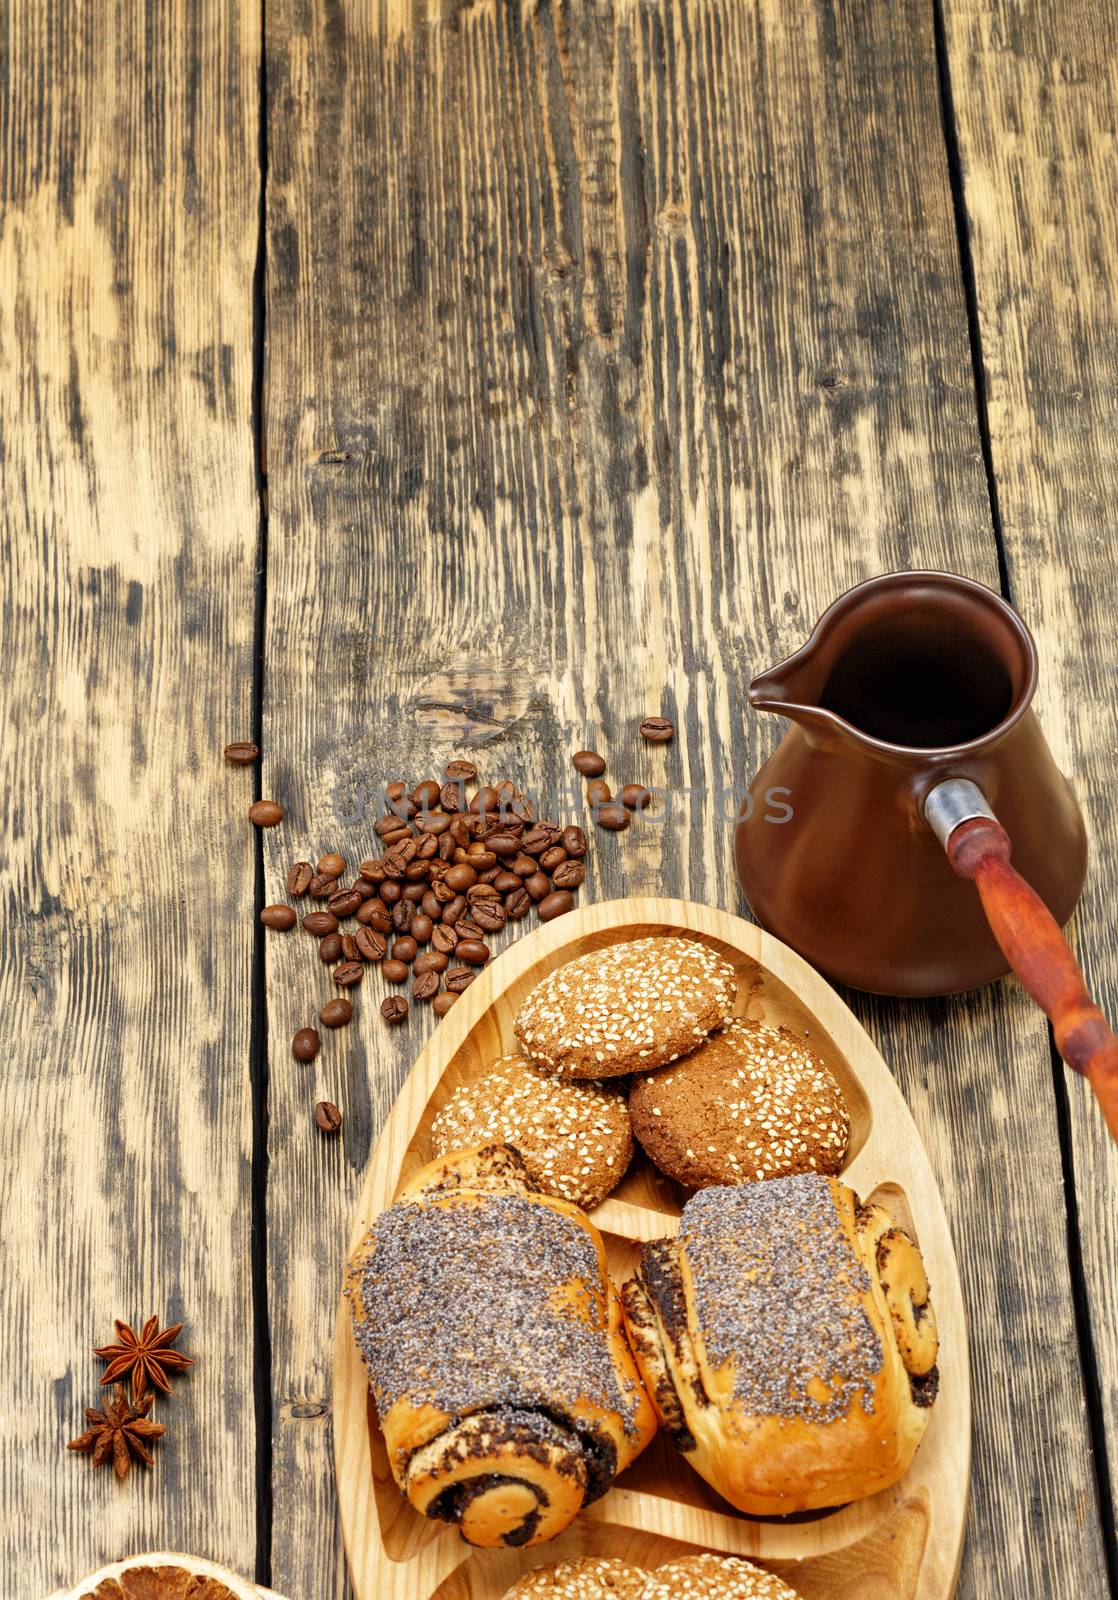 Coffee roasted beans are prepared for making a drink with dried slices of orange, anise stars. Rustic morning breakfast with homemade fresh buns. by Sergii